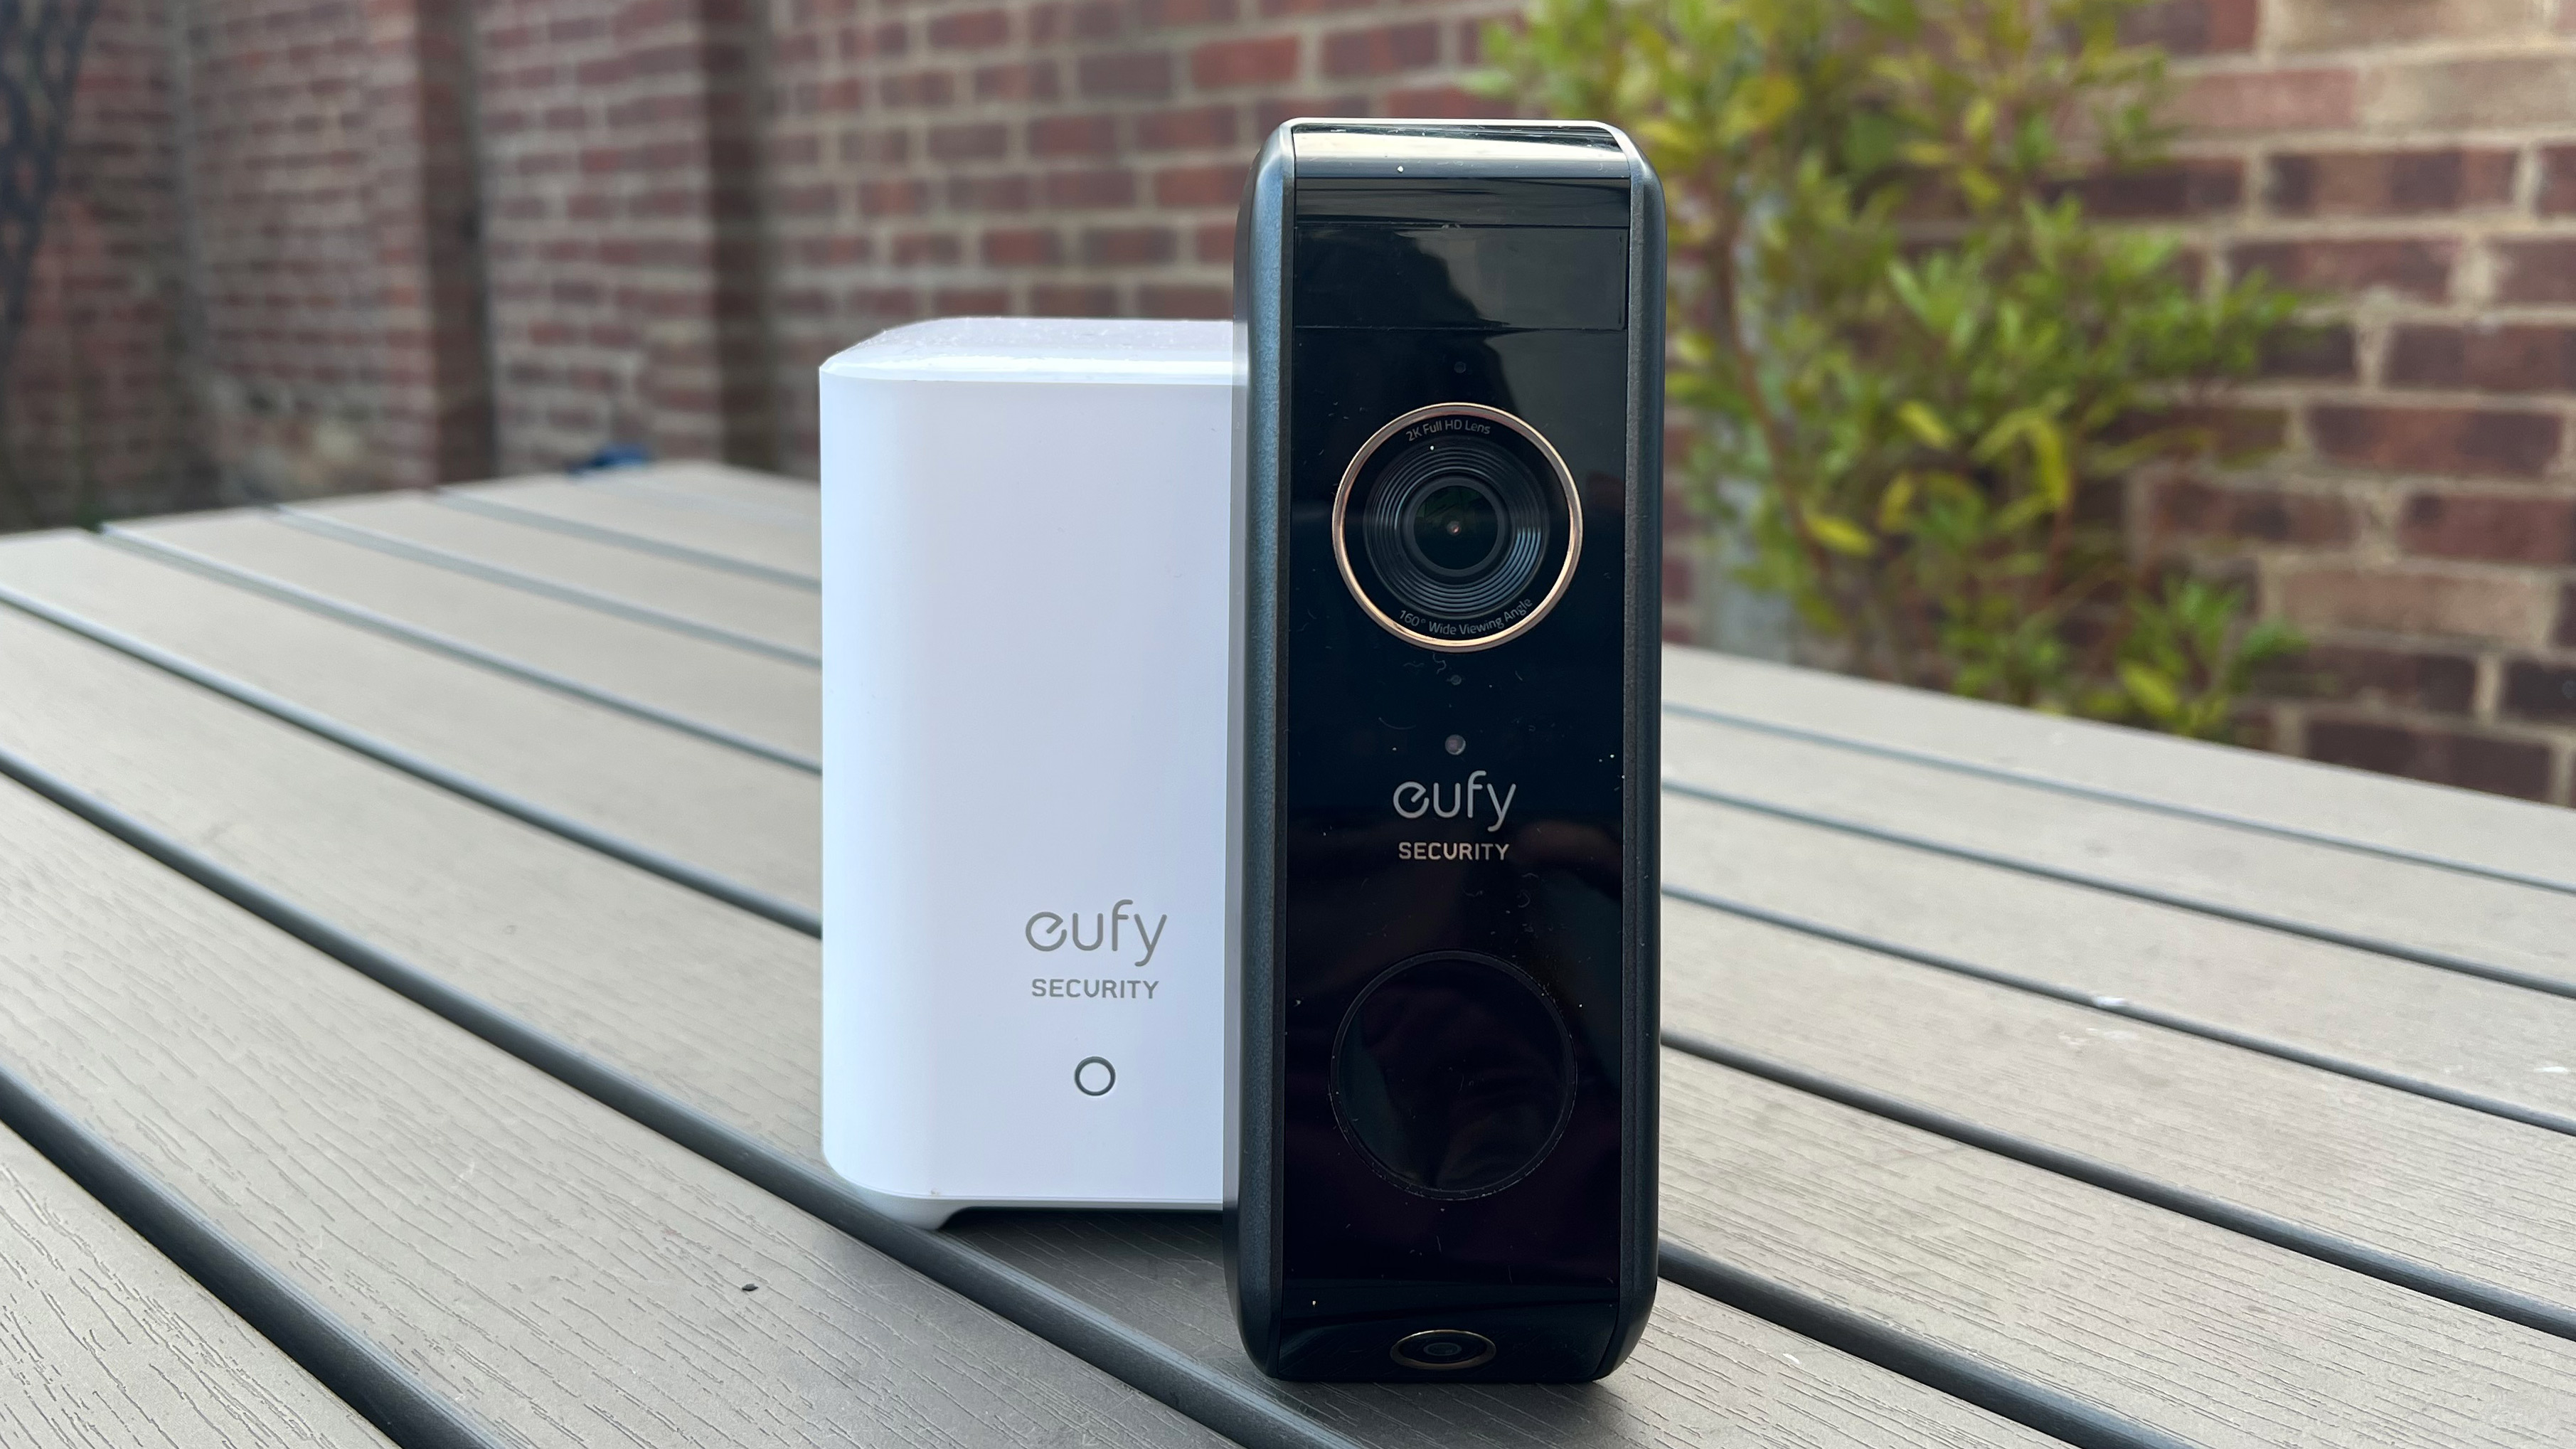 The Eufy Video Doorbell Dual next to the base station